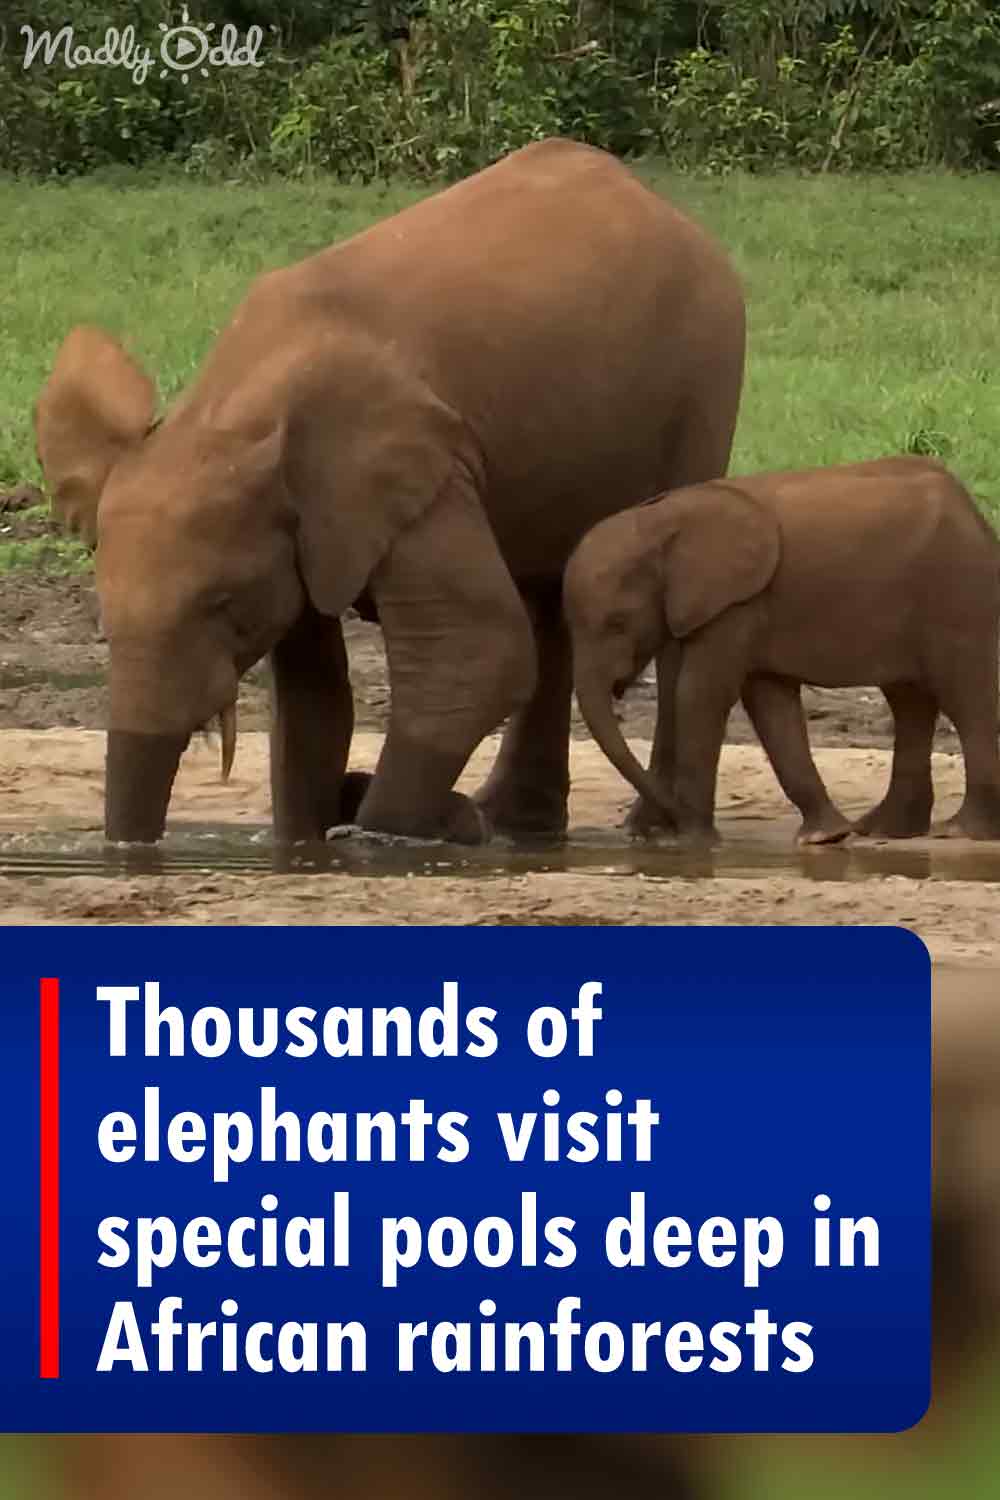 Thousands of elephants visit special pools deep in African rainforests